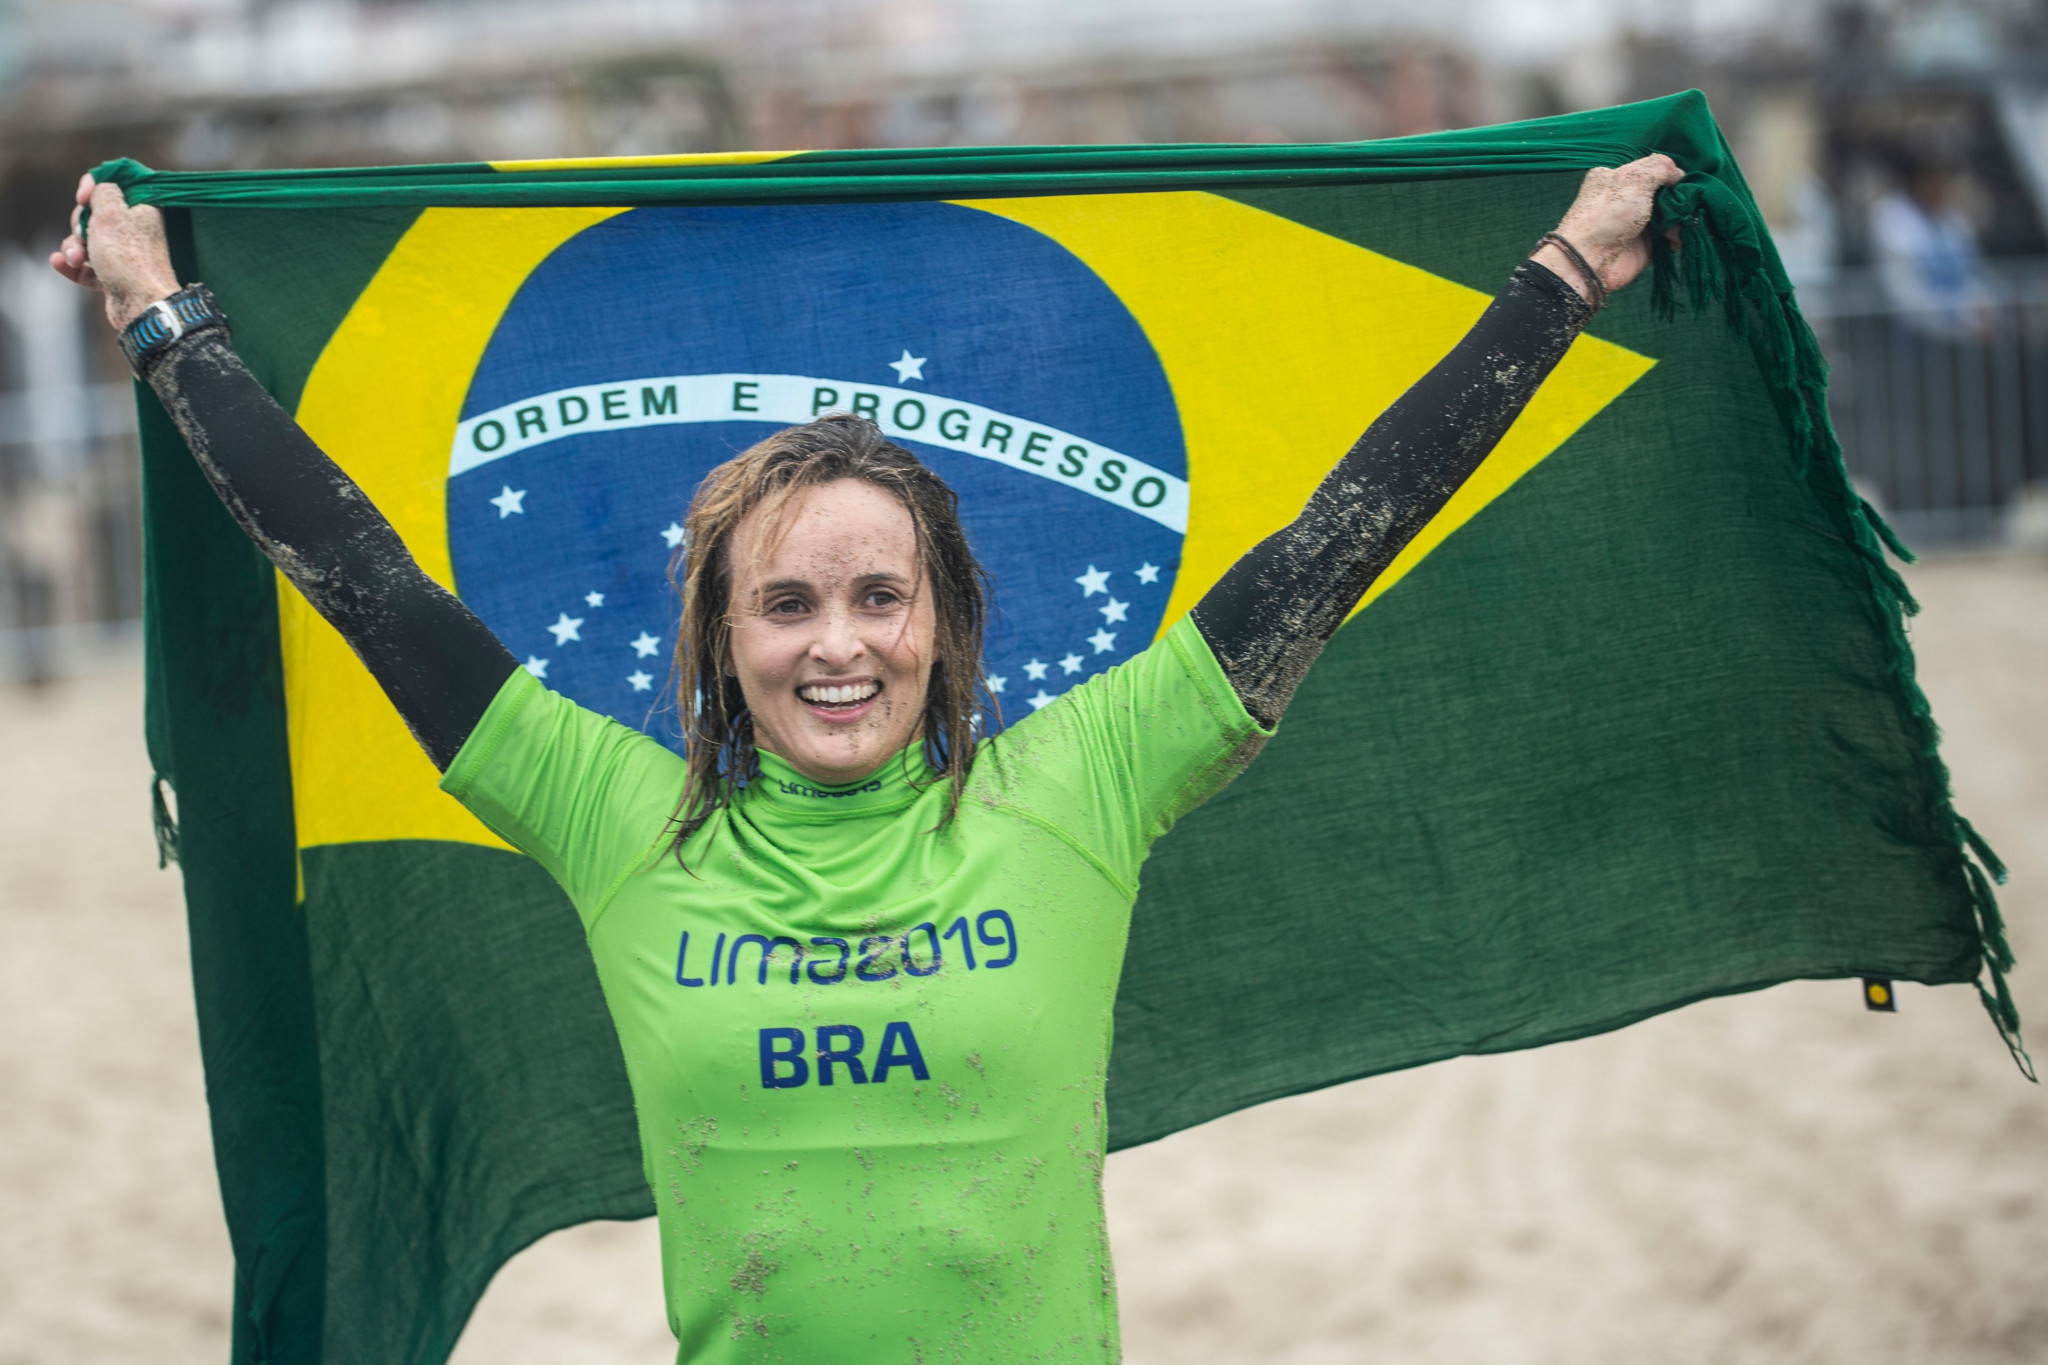 Brazil's Lena Guimaraes won the women's SUP racing event at Lima 2019 ©Getty Images